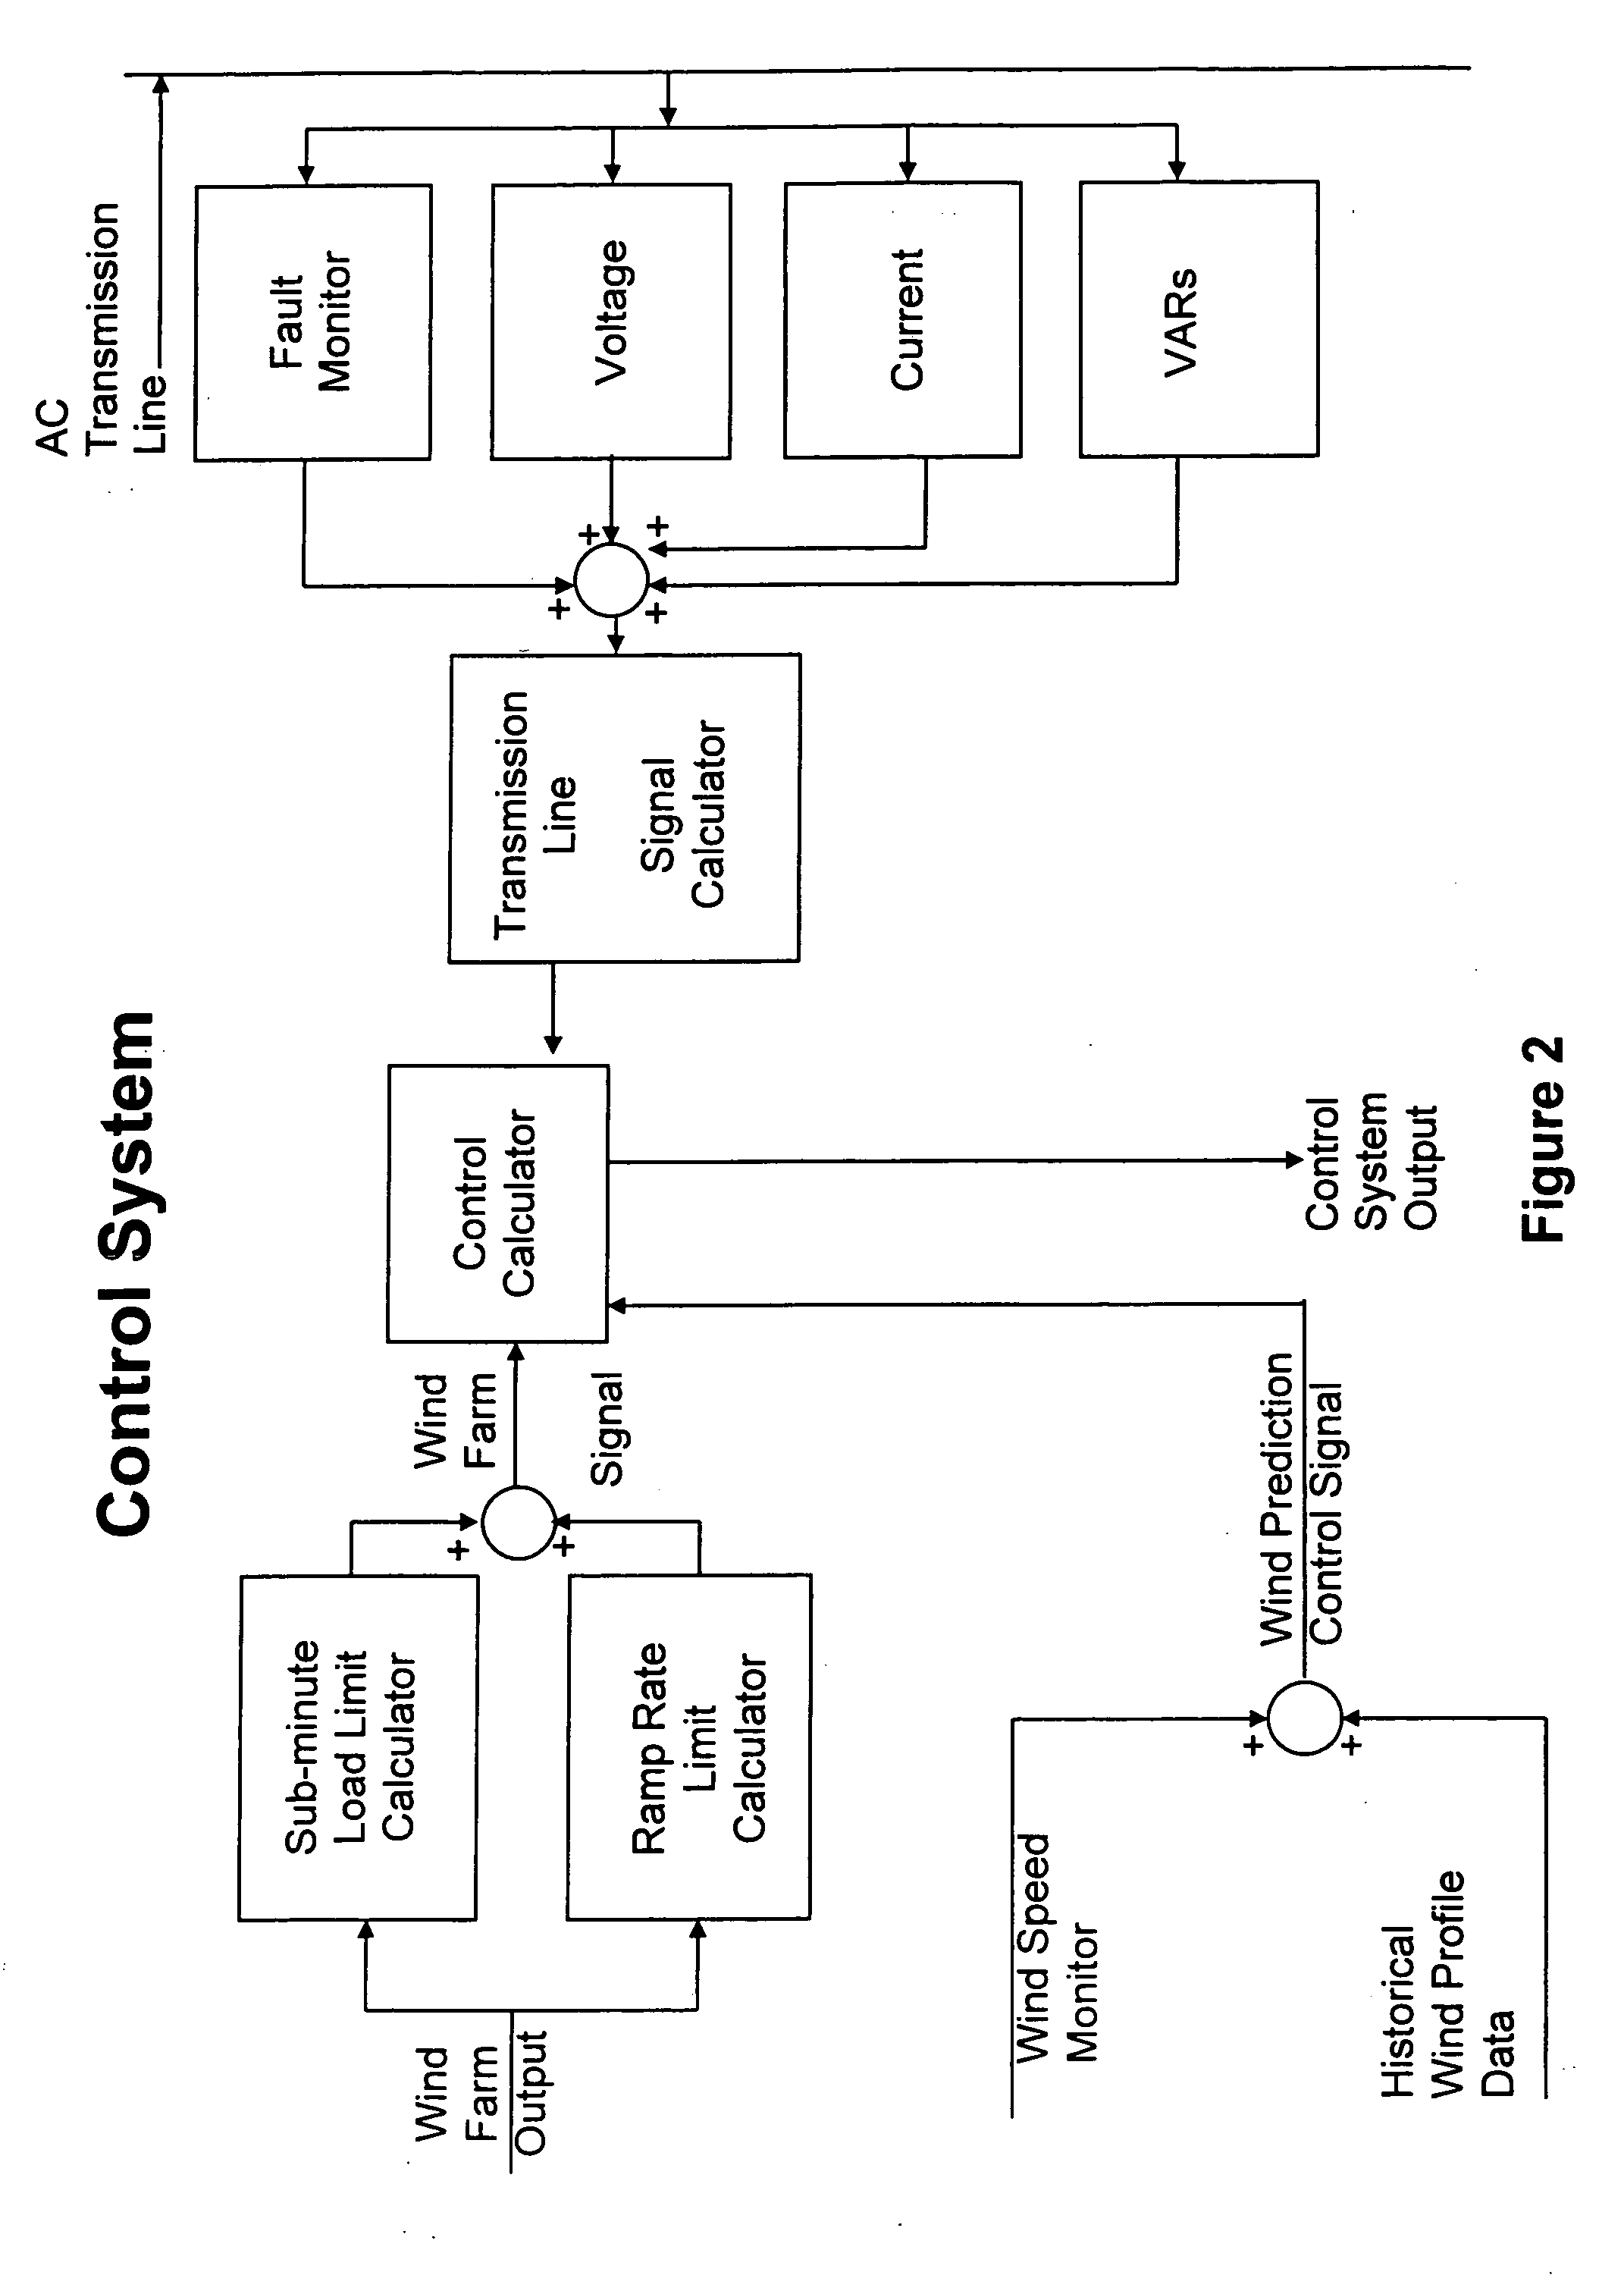 Power control interface between a wind farm and a power transmission system